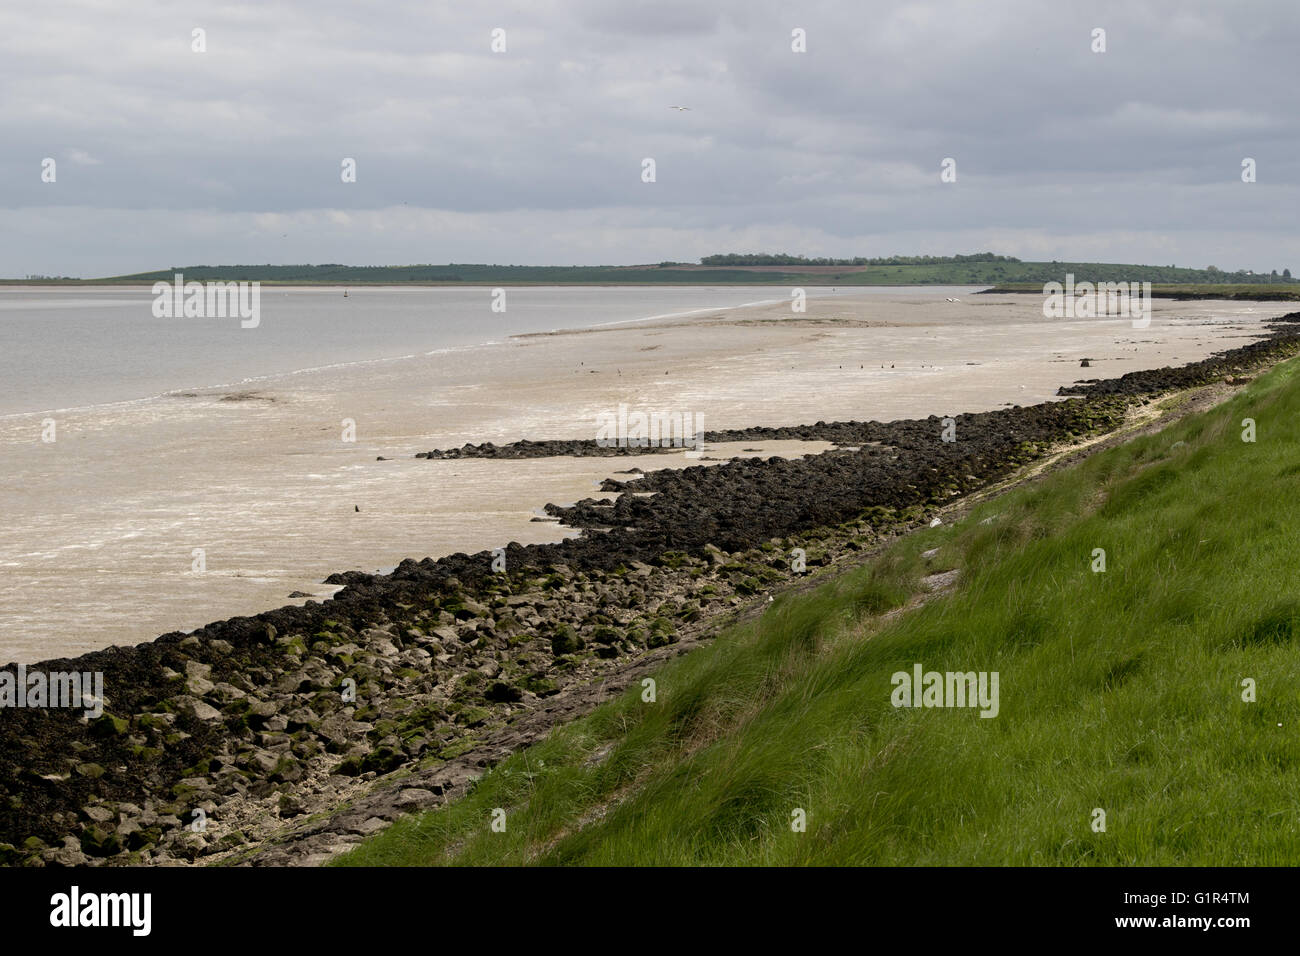 River Swale looking eastwards towards the Thames Estuary from Saxon Shore Way on an overcast day at low tide Stock Photo